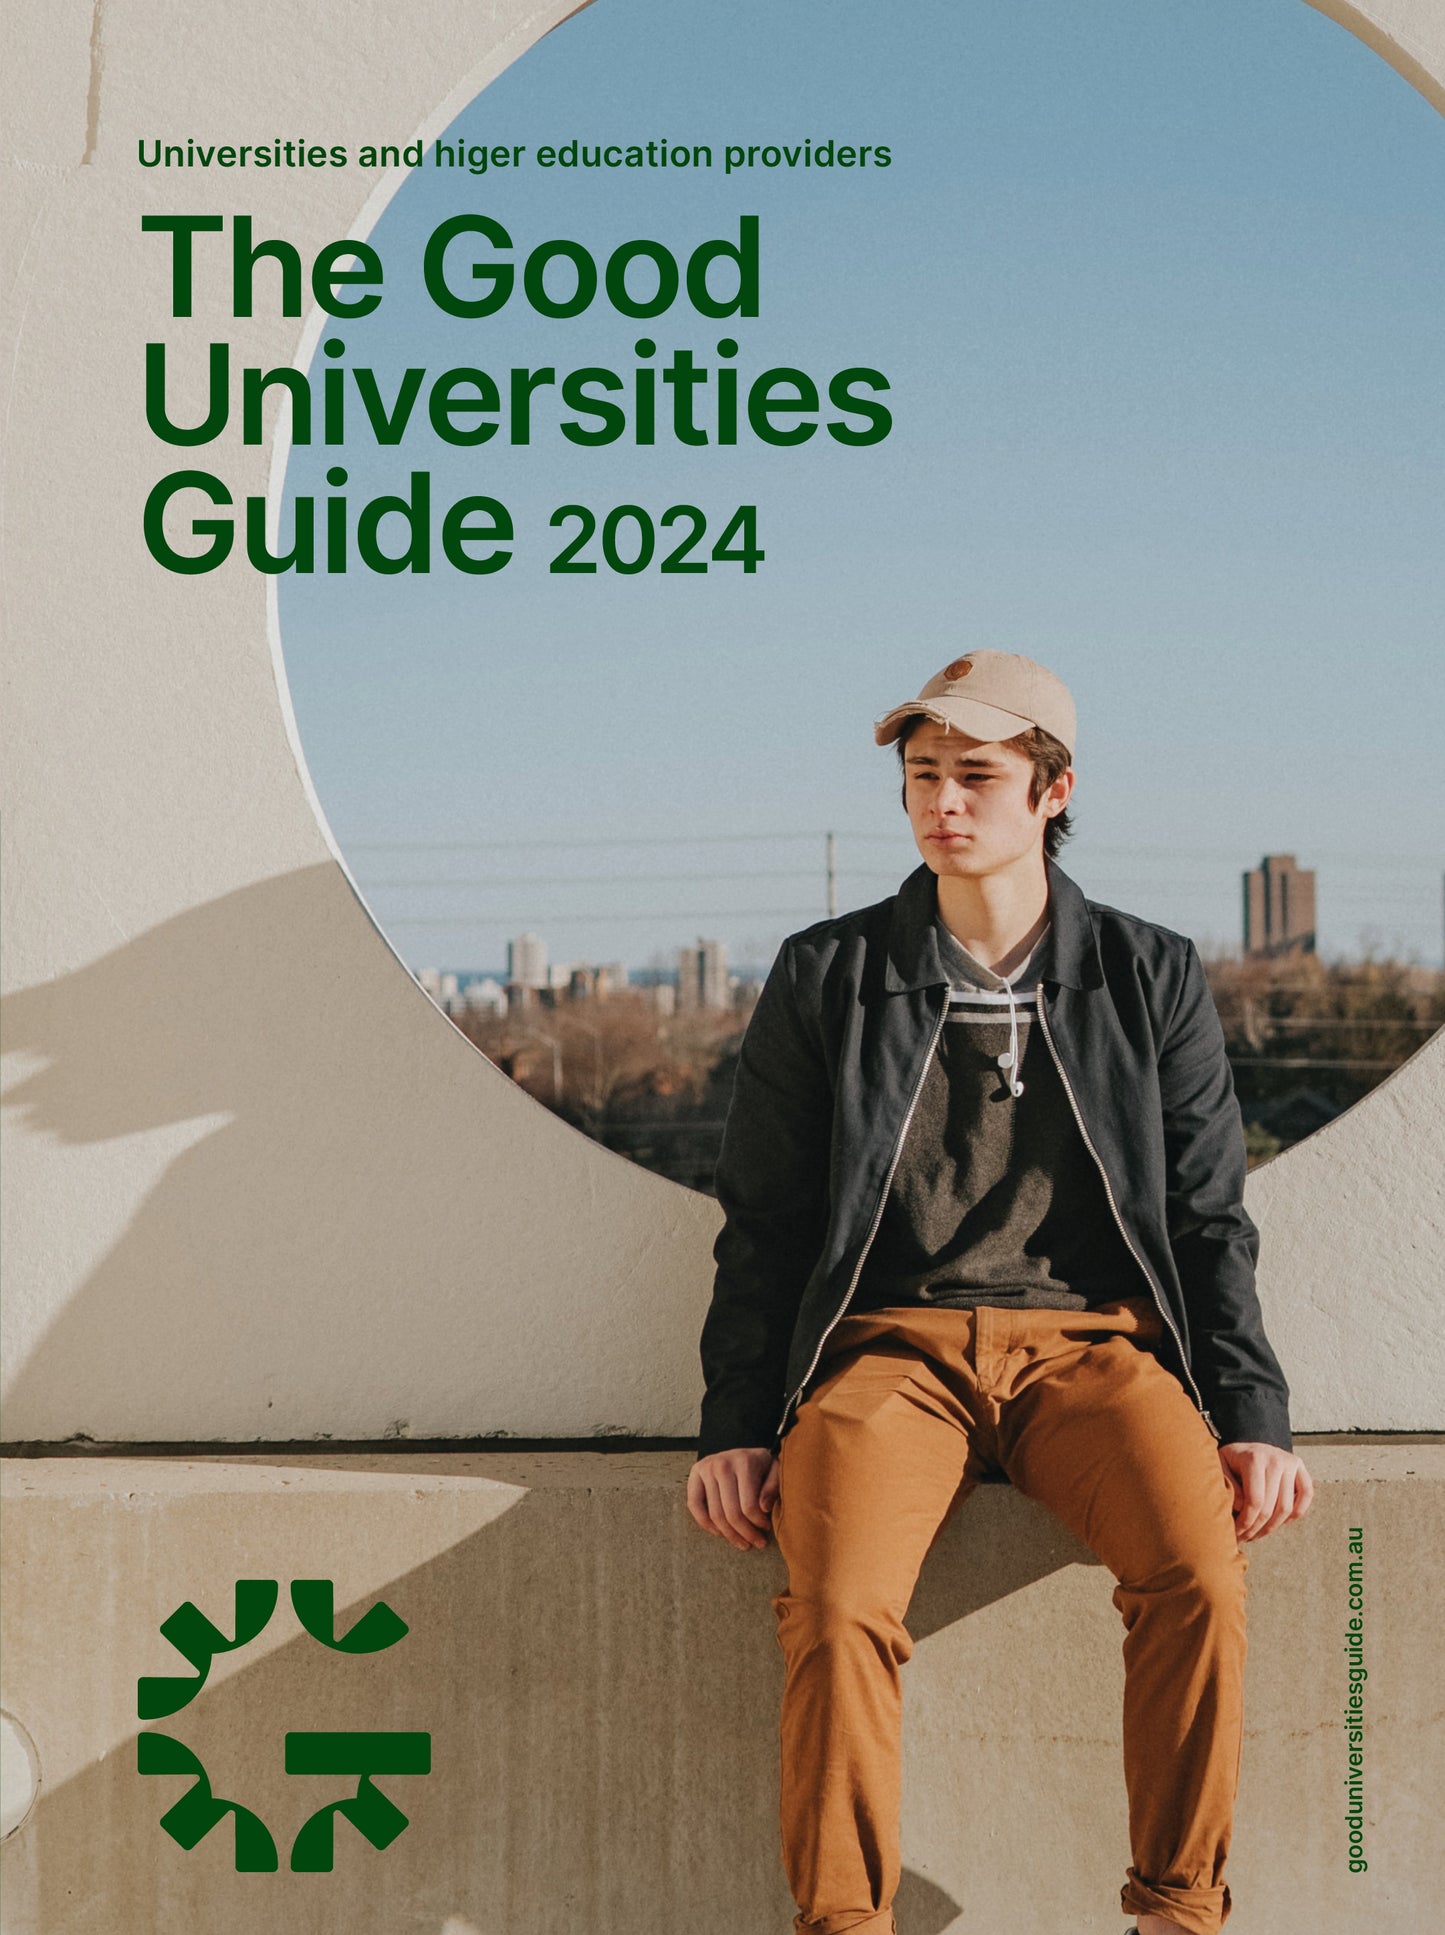 The Good Careers Guide and The Good Universities Guide 2024 Flip Book